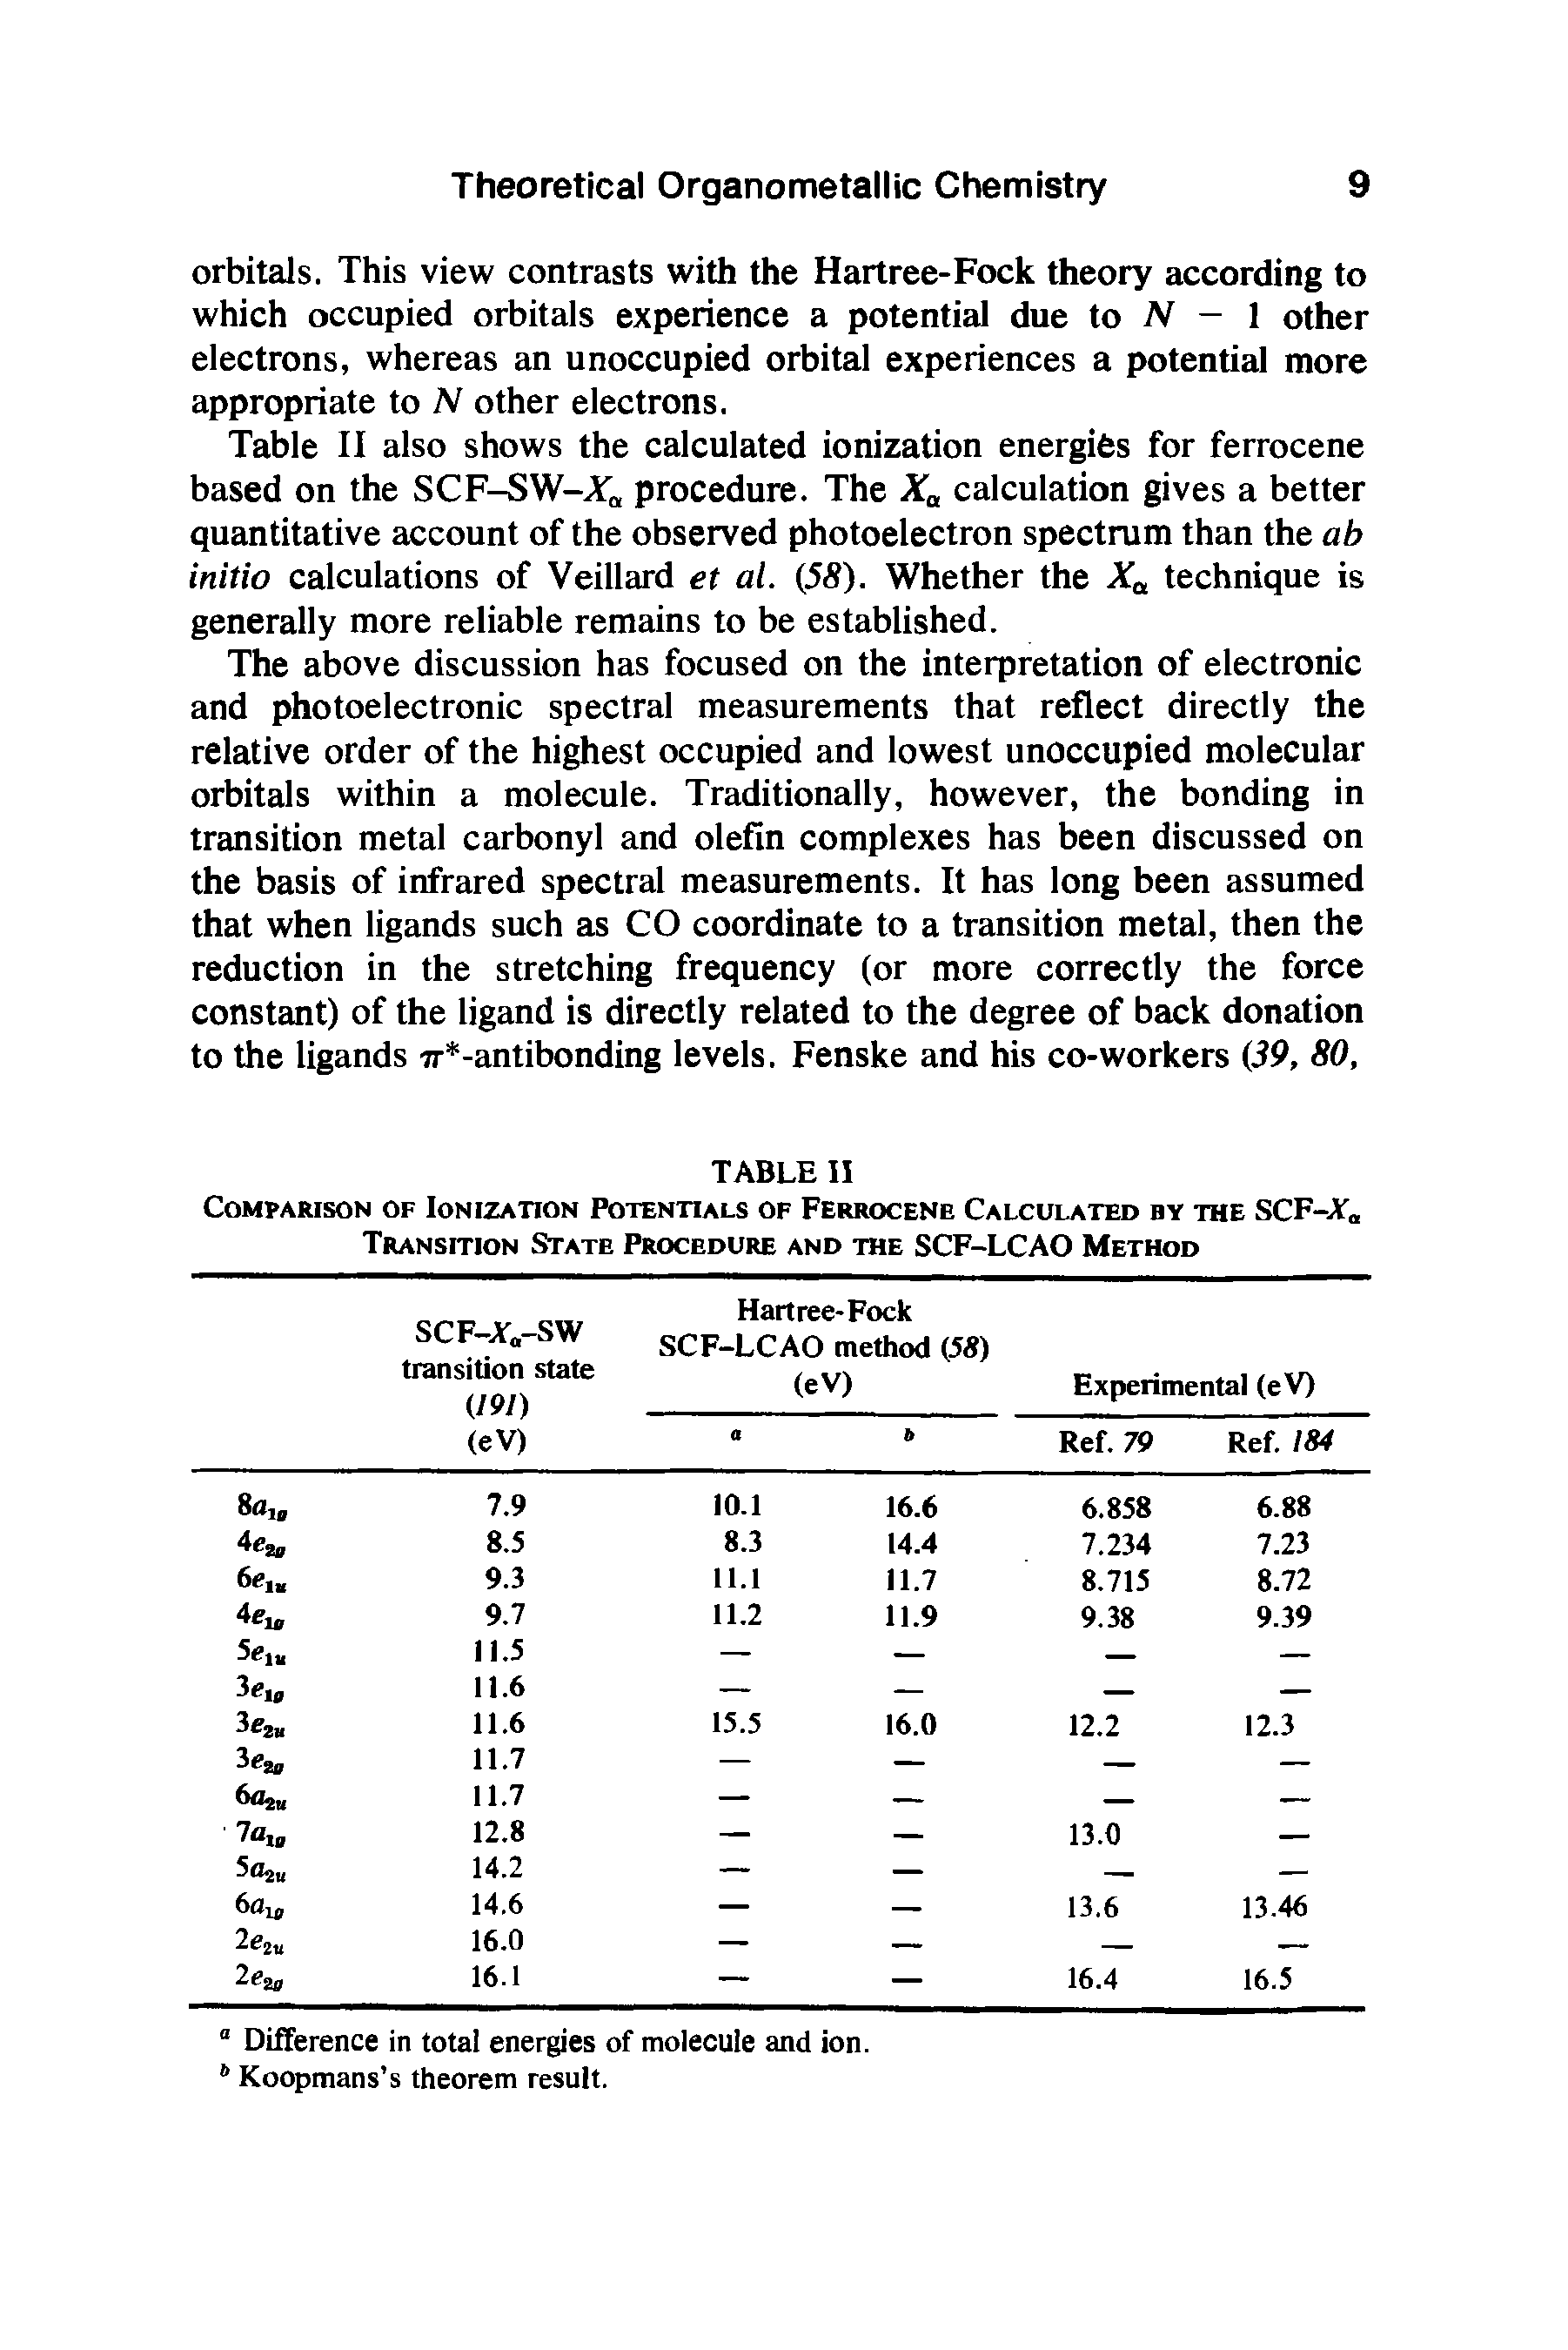 Table II also shows the calculated ionization energies for ferrocene based on the SCF-SW-A"a procedure. The Xa calculation gives a better quantitative account of the observed photoelectron spectrum than the ab initio calculations of Veillard et al. (58). Whether the Xa technique is generally more reliable remains to be established.